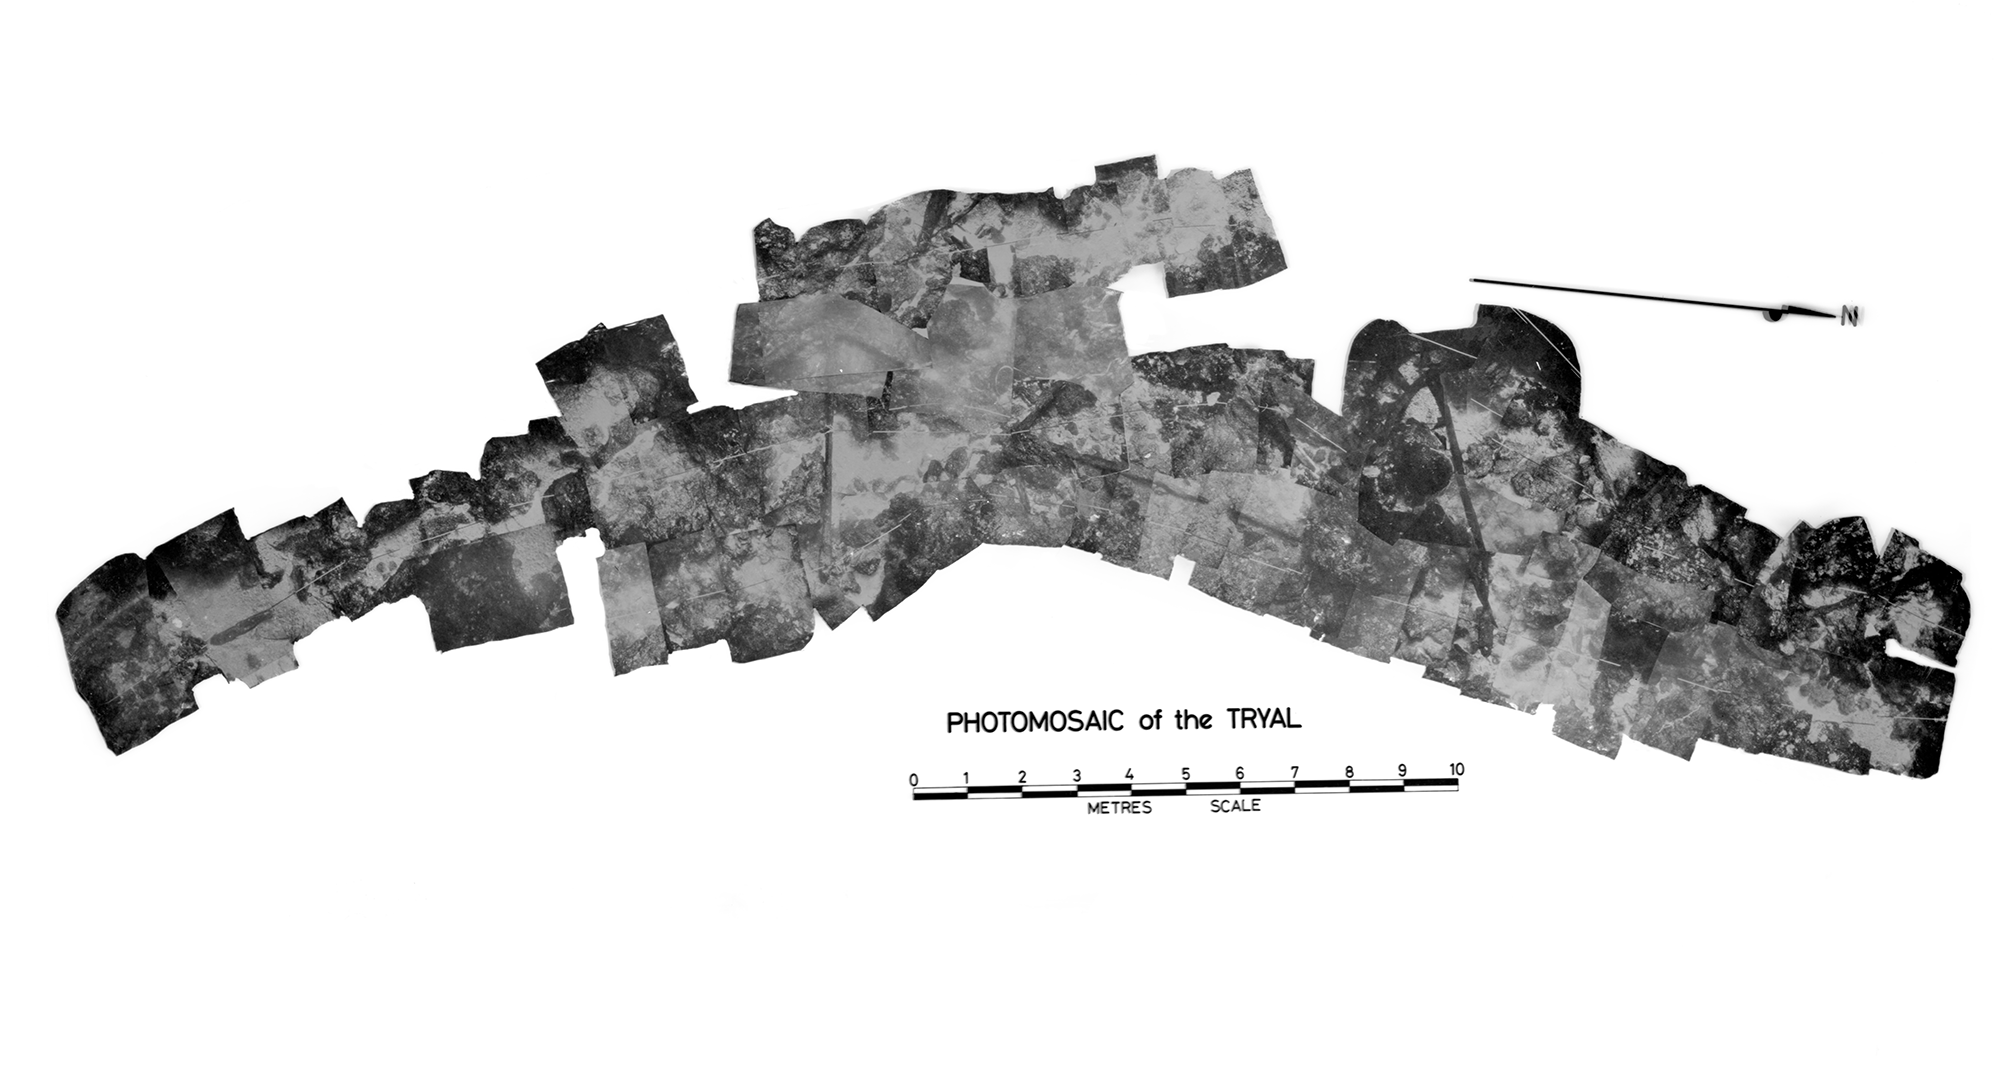 Photomosaic of the Trial wreck site from the 1971 expedition